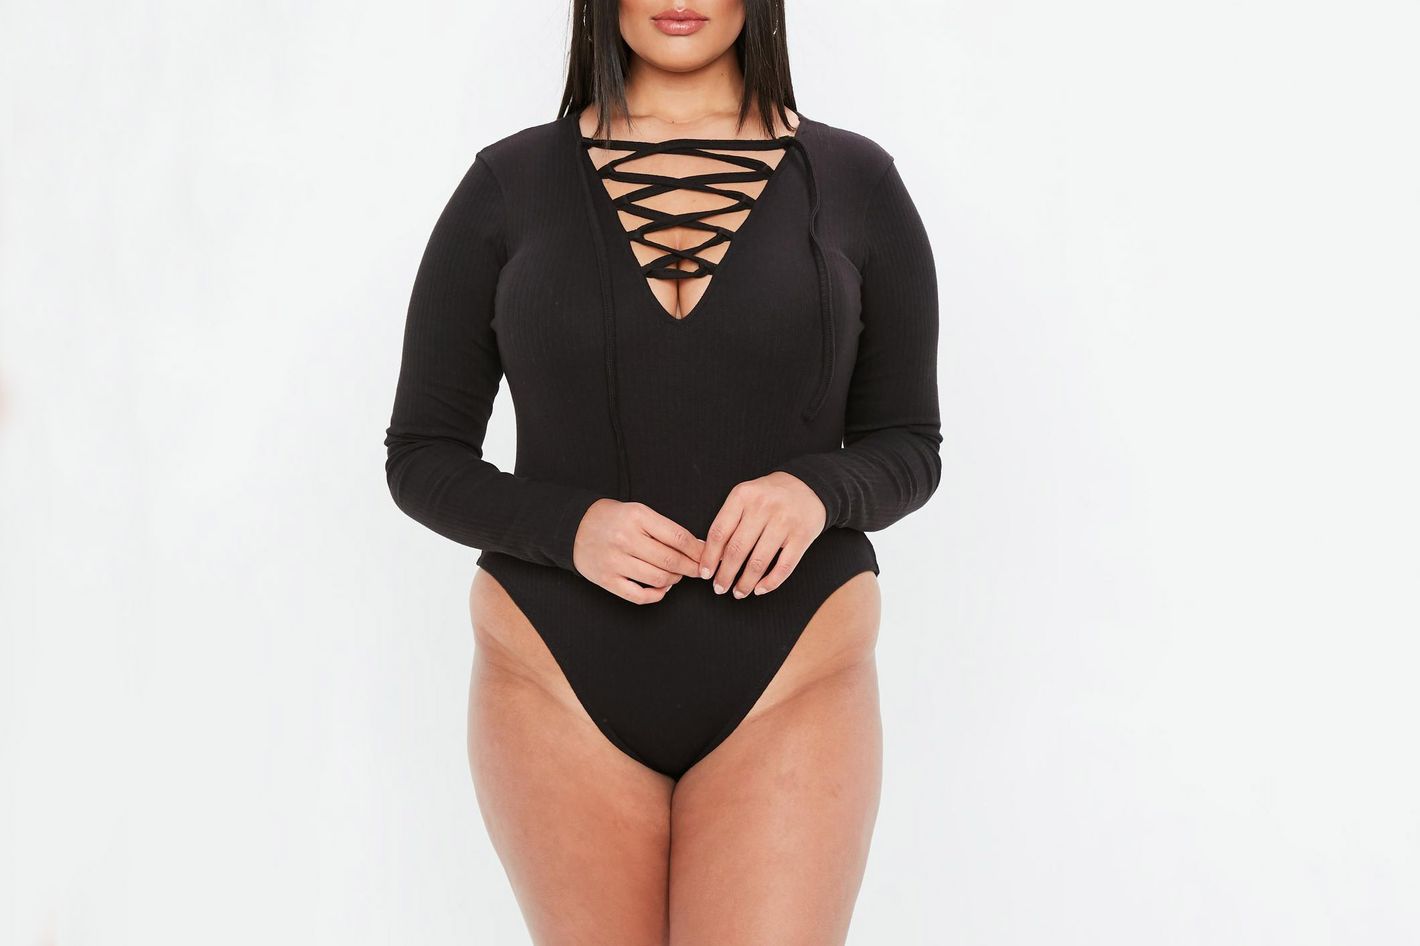  Long Sleeve Body Suits For Womens Black Plus Size